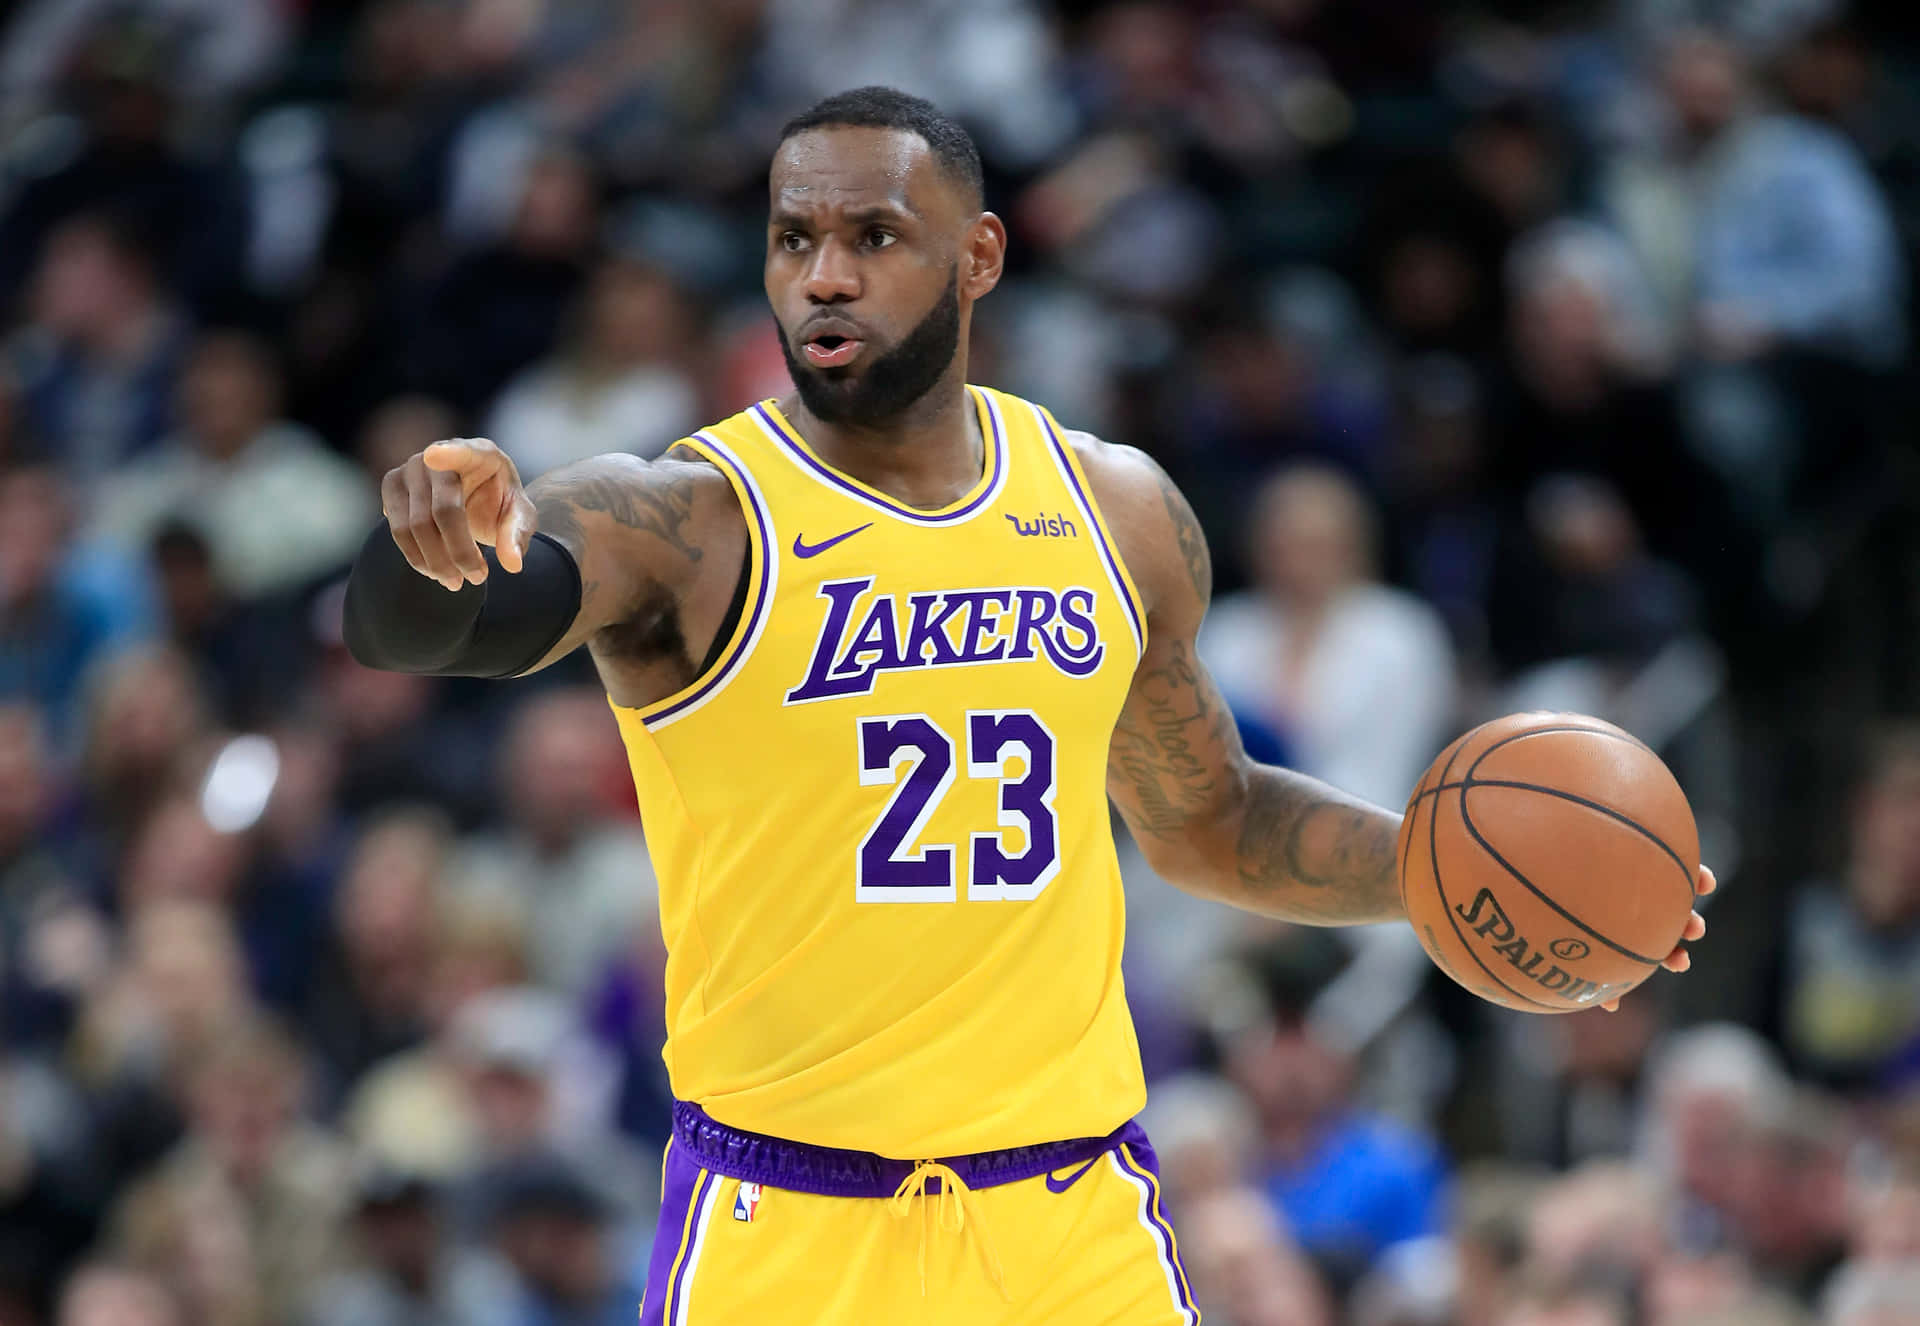 Lebron James playing for the Lakers